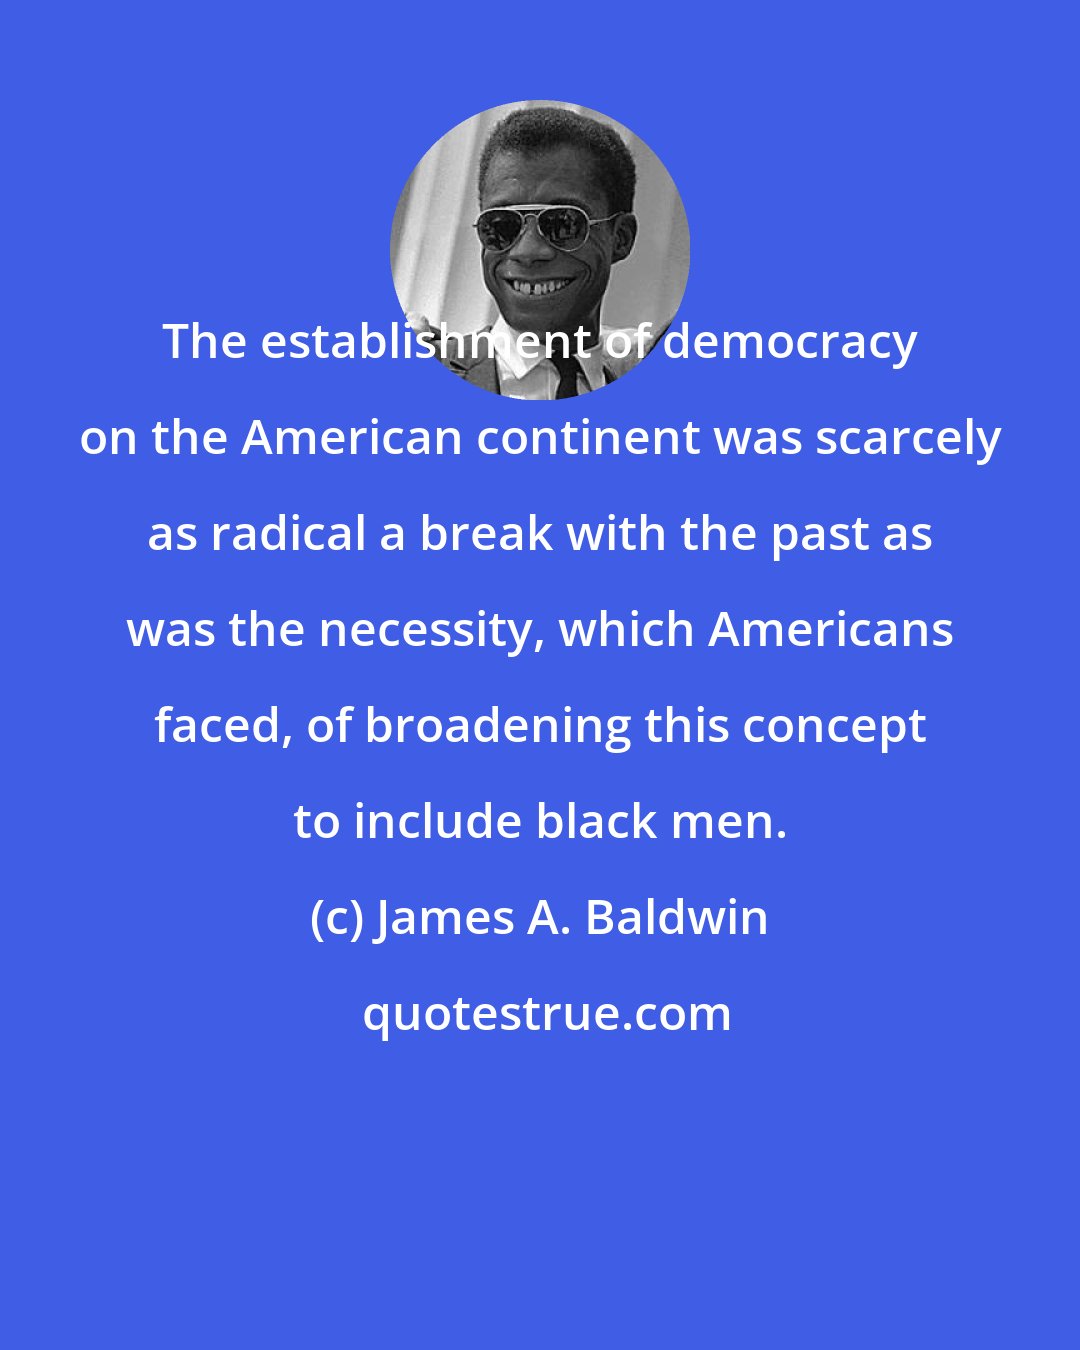 James A. Baldwin: The establishment of democracy on the American continent was scarcely as radical a break with the past as was the necessity, which Americans faced, of broadening this concept to include black men.